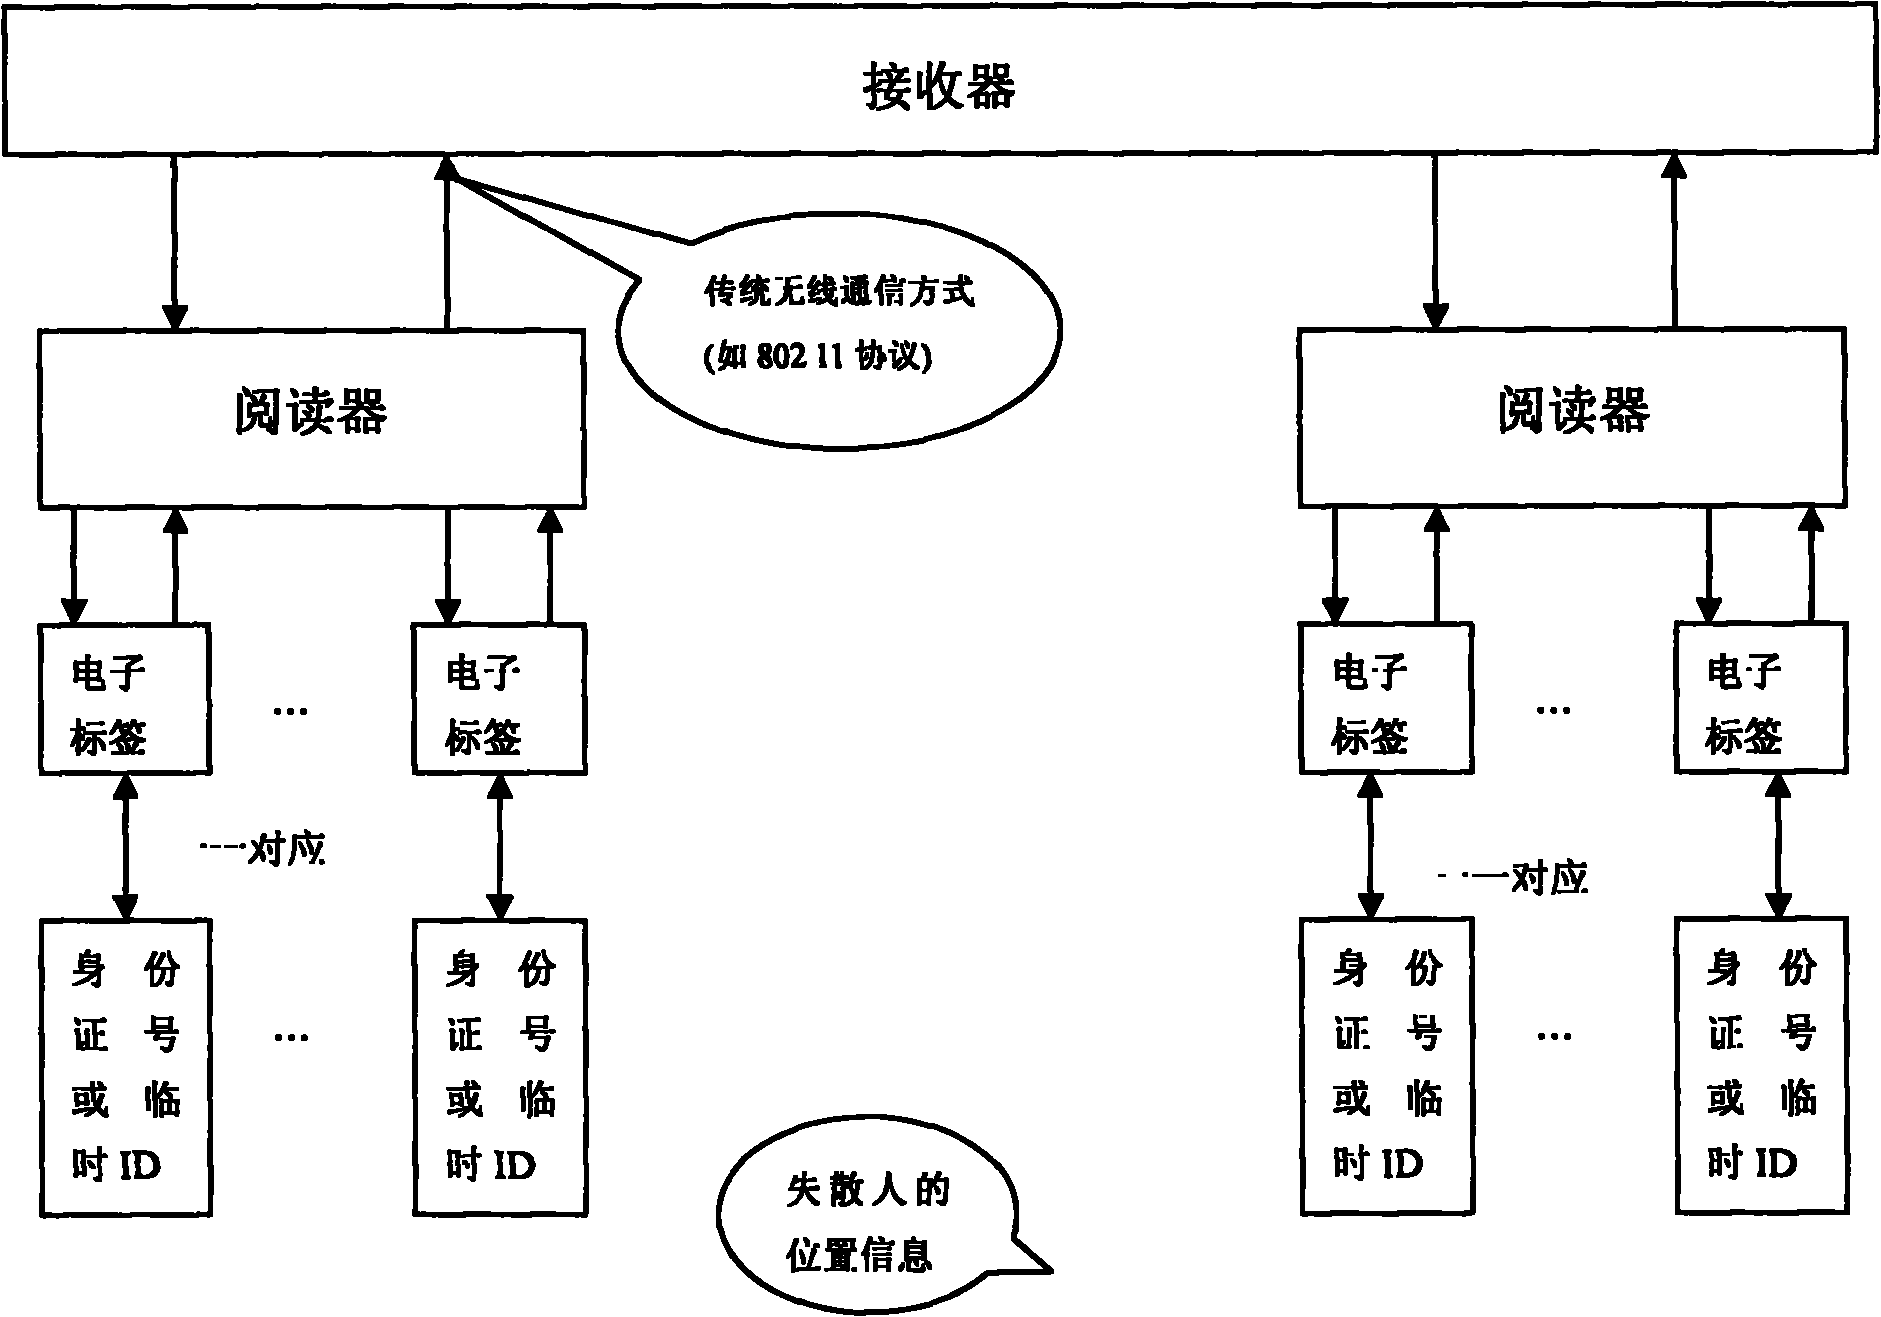 Information interaction method based on information physical system and radio frequency technique